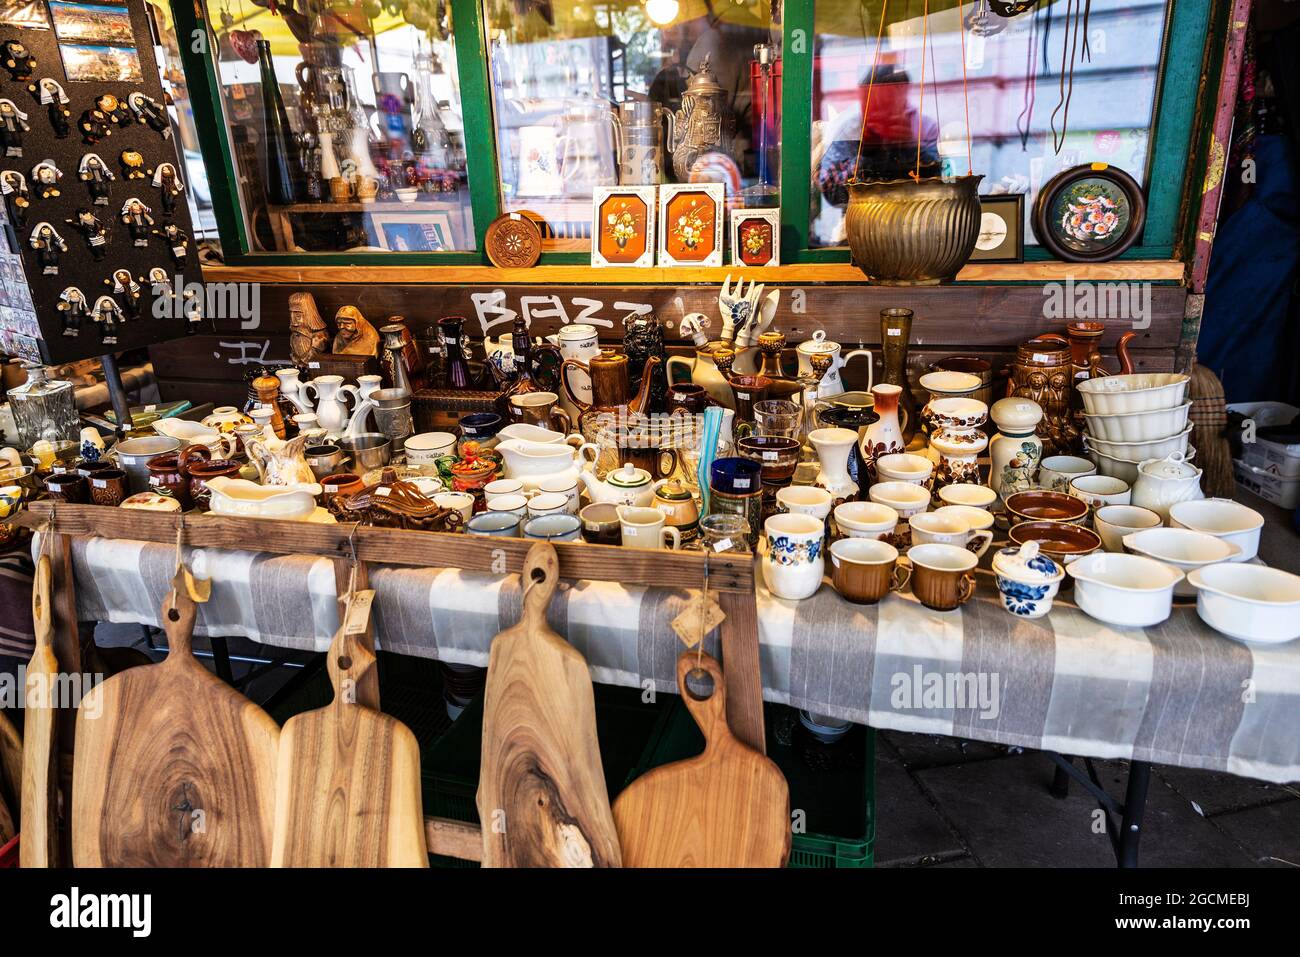 Krakow, Poland - August 28, 2018: Flea market of the Plac Nowy that showcase an assortment of antiques in Krakow, Poland Stock Photo